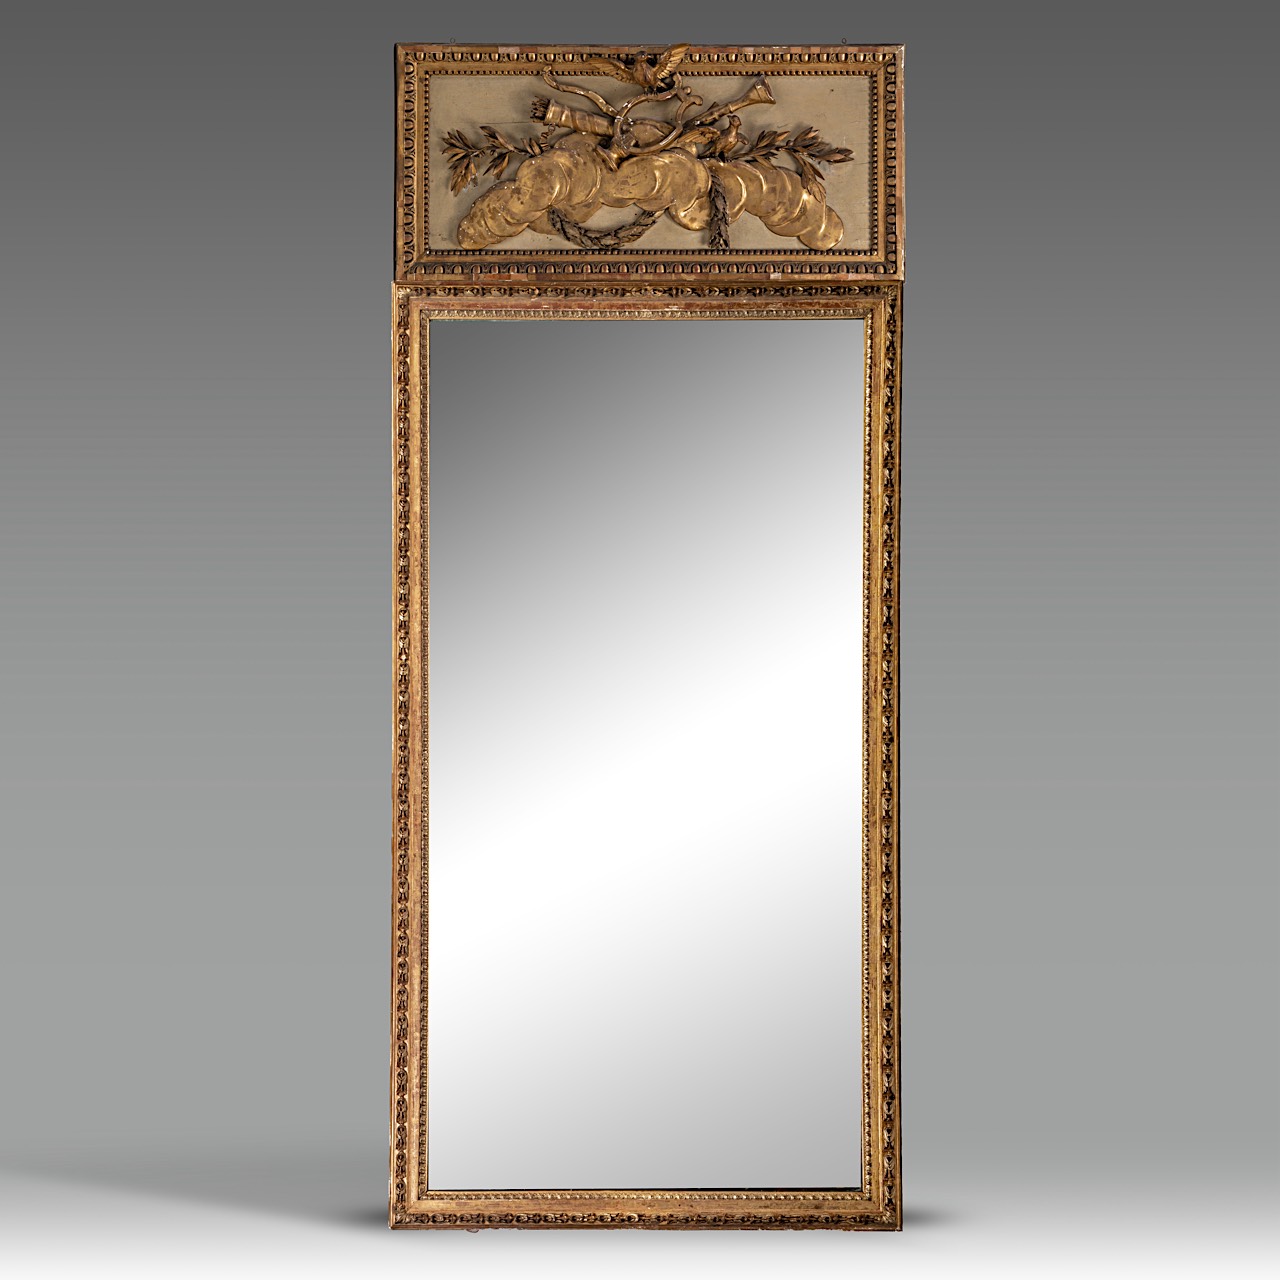 A Louis XVI giltwood trumeau mirror, decorated with a trophy on top, H 270 - W 118 cm